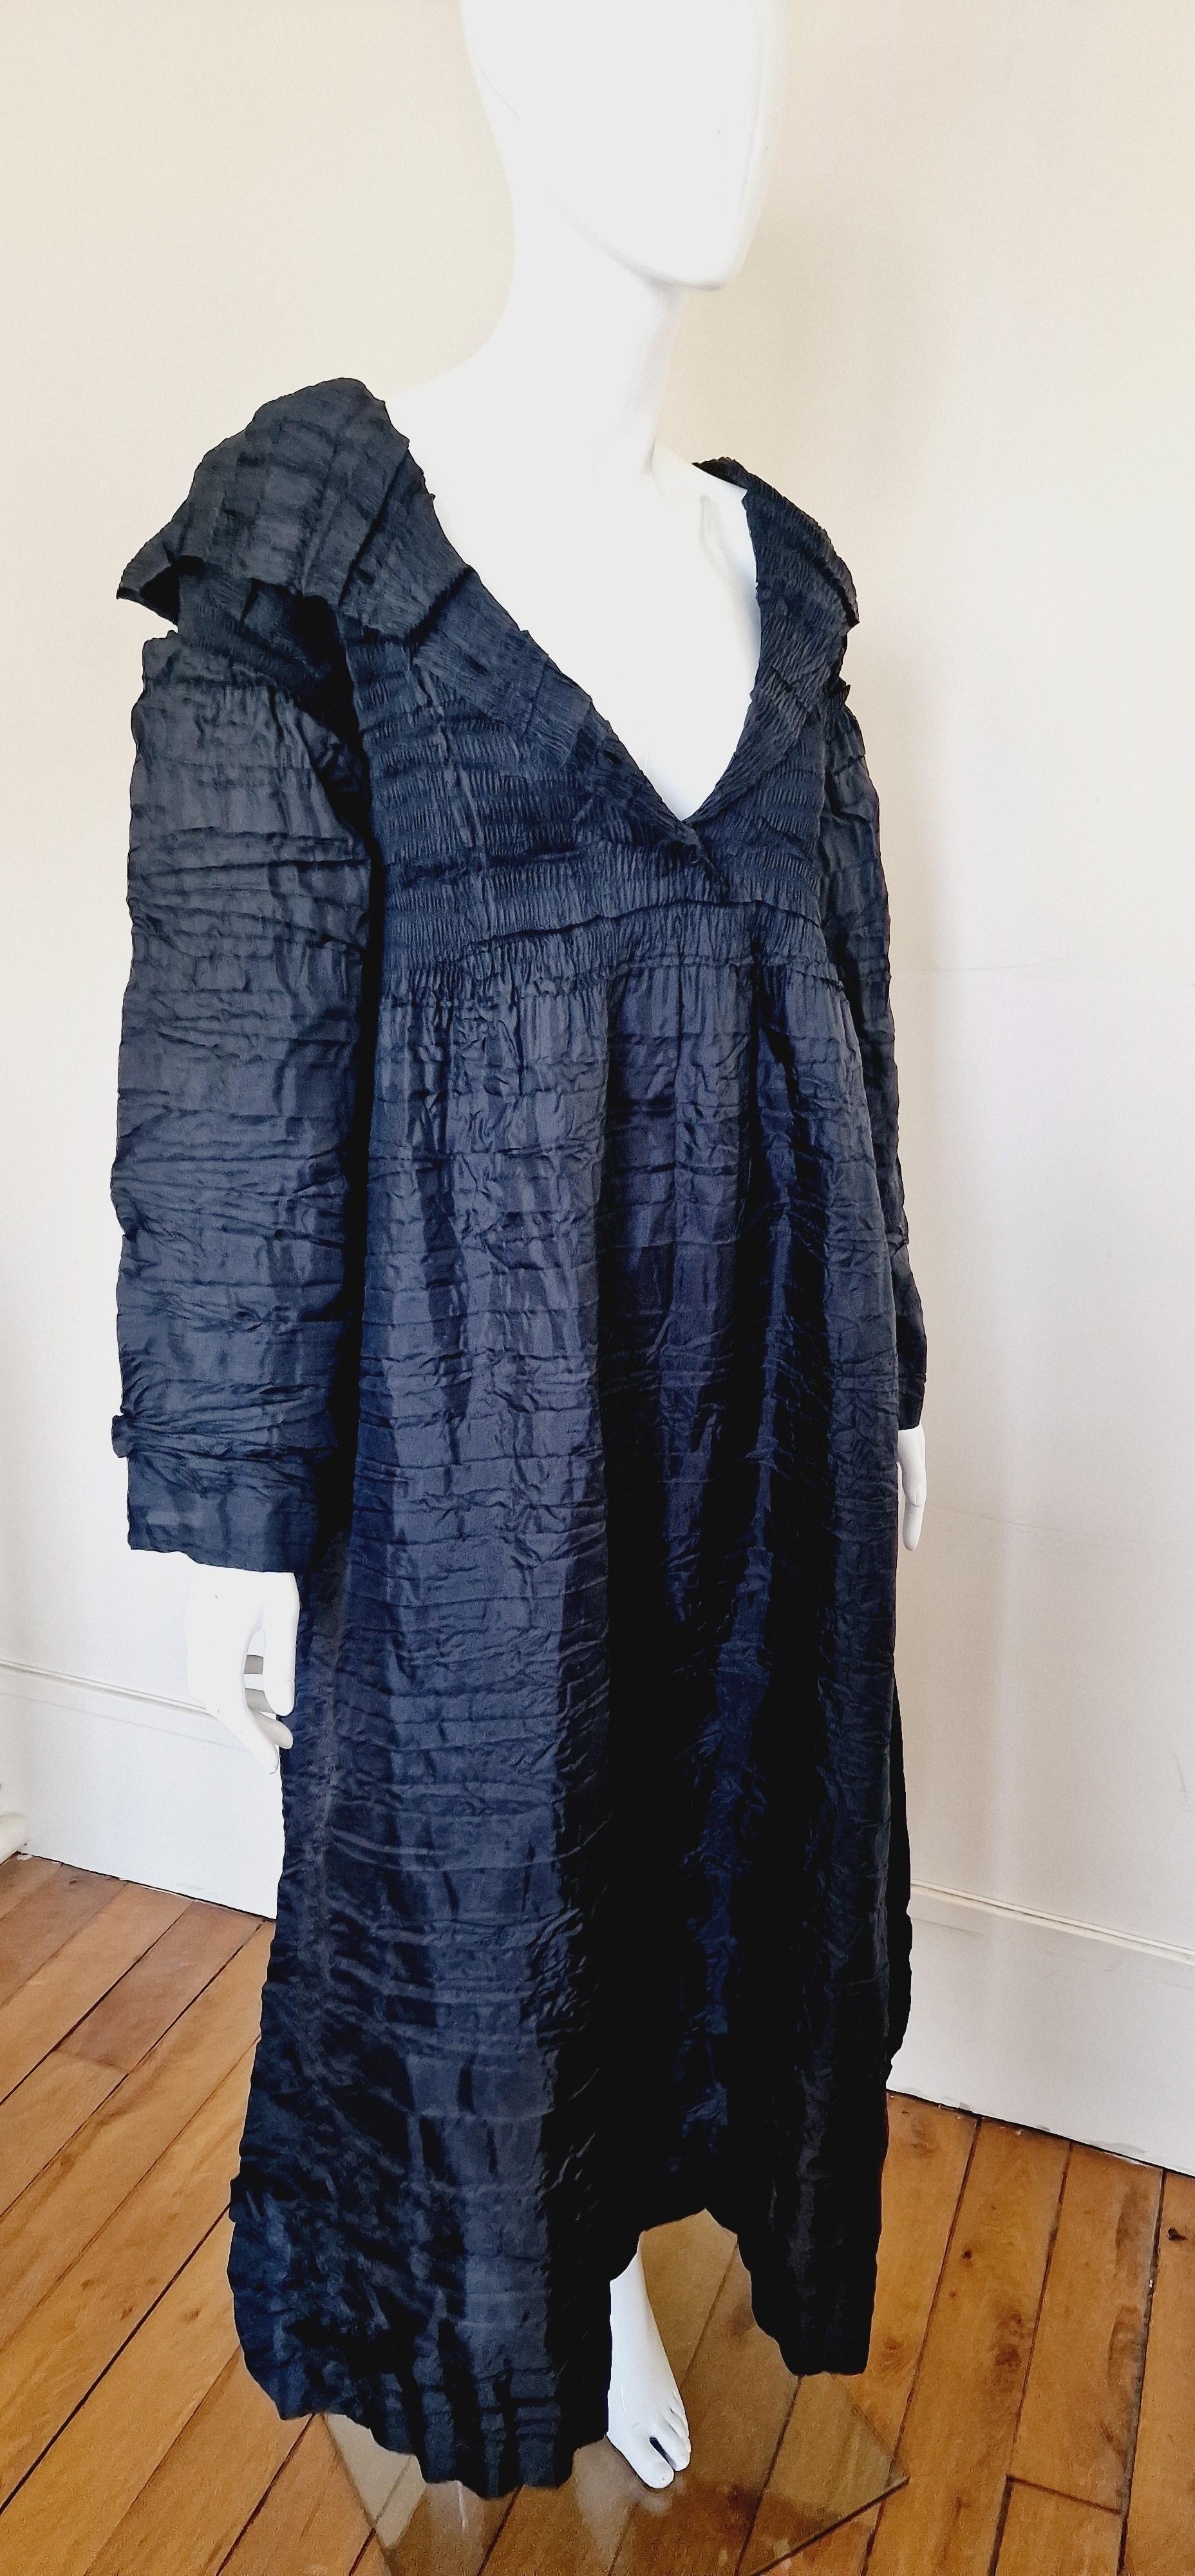 RARE Issey Miyake dress !
High collar. It can be worn in 2 way; as turtleneck and v-cut collar.
Huge and extra long bell sleeves.

VERY GOOD condition! There is afew tiny pin holes, these are nit wisible when you wear it (to fix it would make it